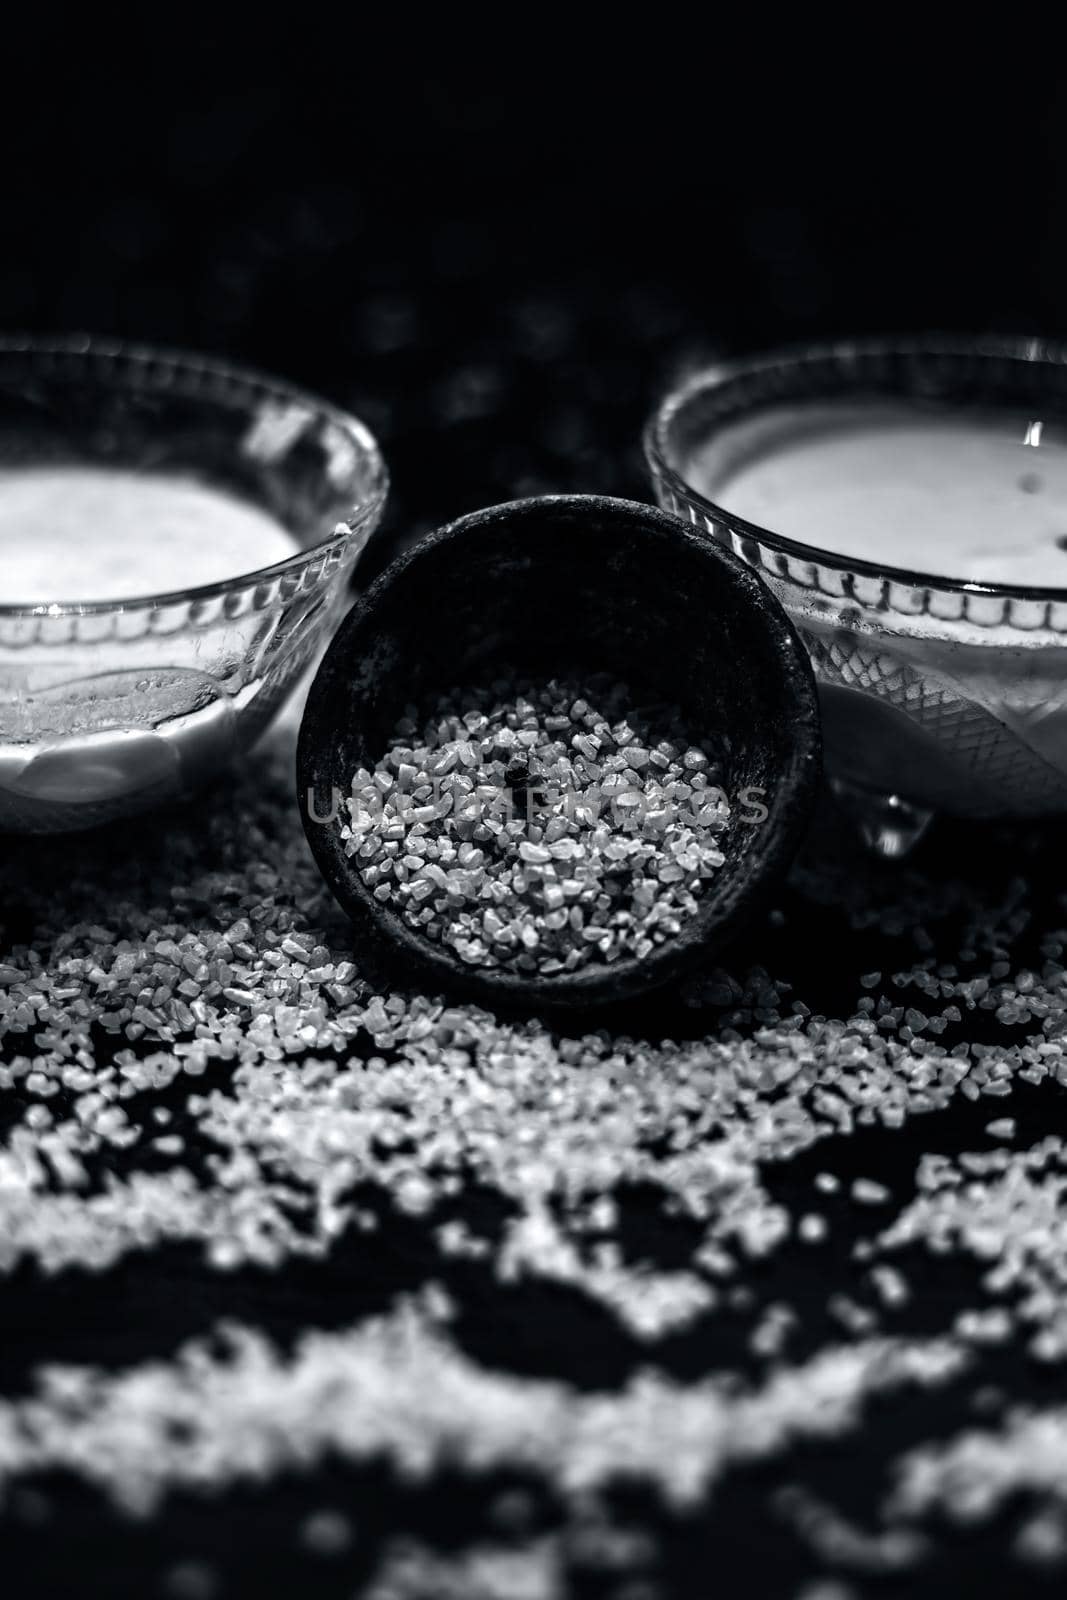 Curd or yogurt and oats face mask on the woodne surface in a glass bowl along with some raw oats in a black colored clay bowl and some spread on the surface. To Exfoliate Your Skin. by mirzamlk